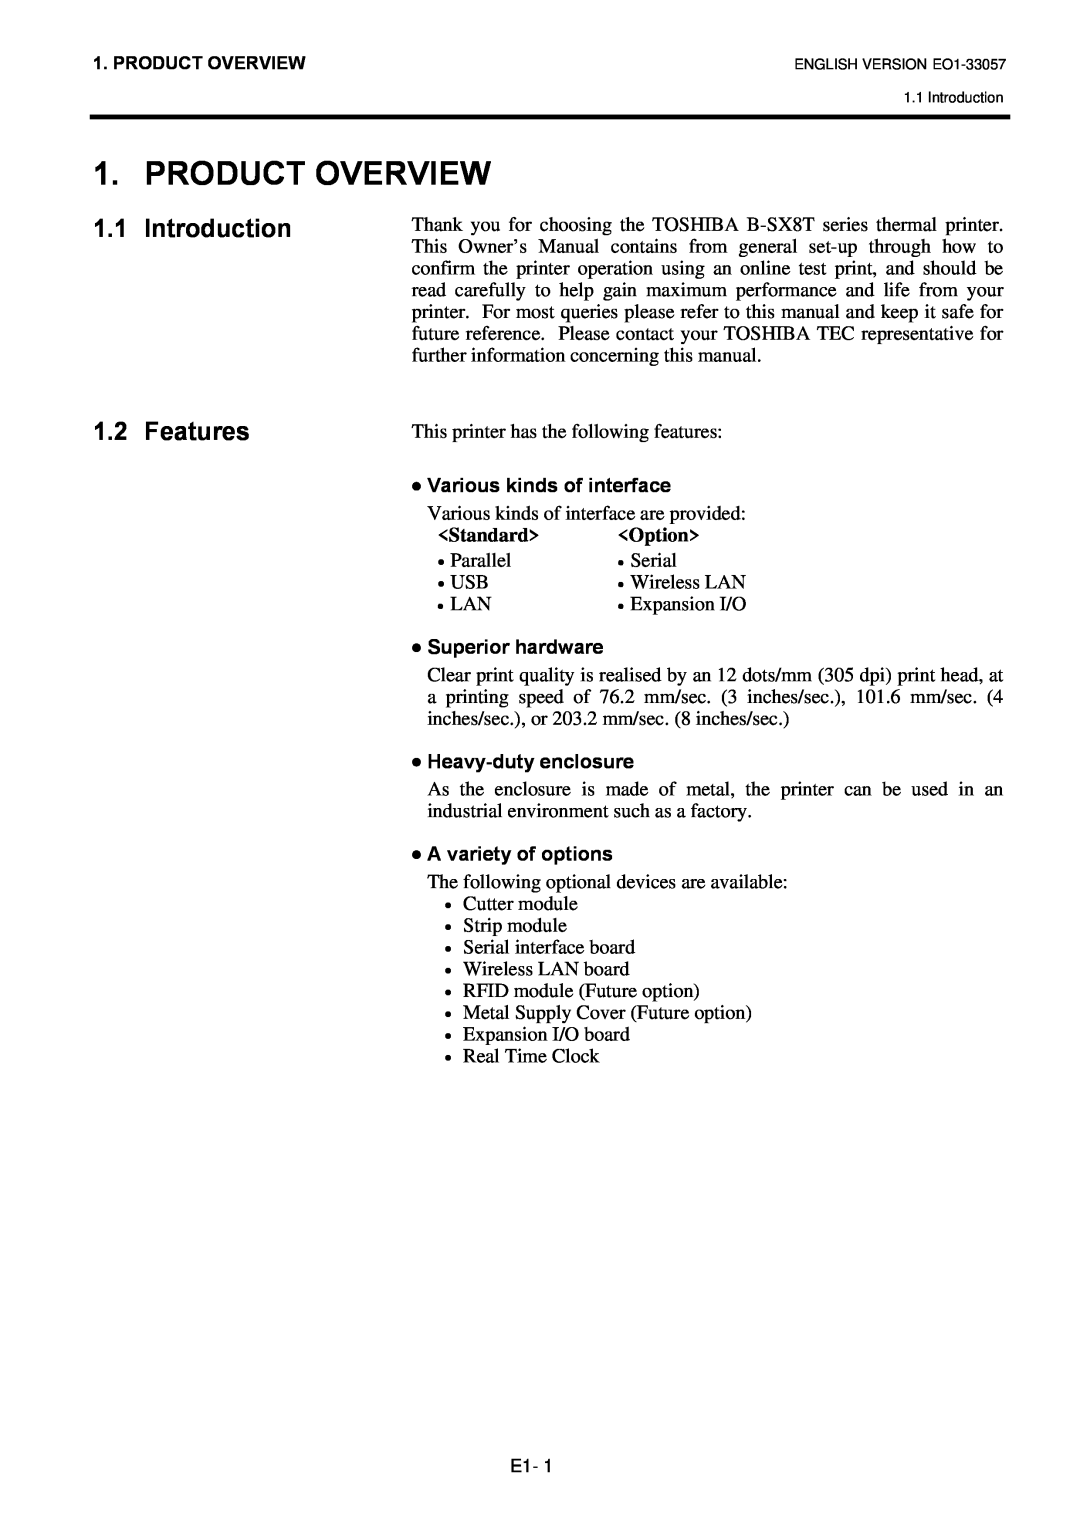 Toshiba B-SX8T SERIES, EO1-33057D owner manual Product Overview, Introduction, Features 